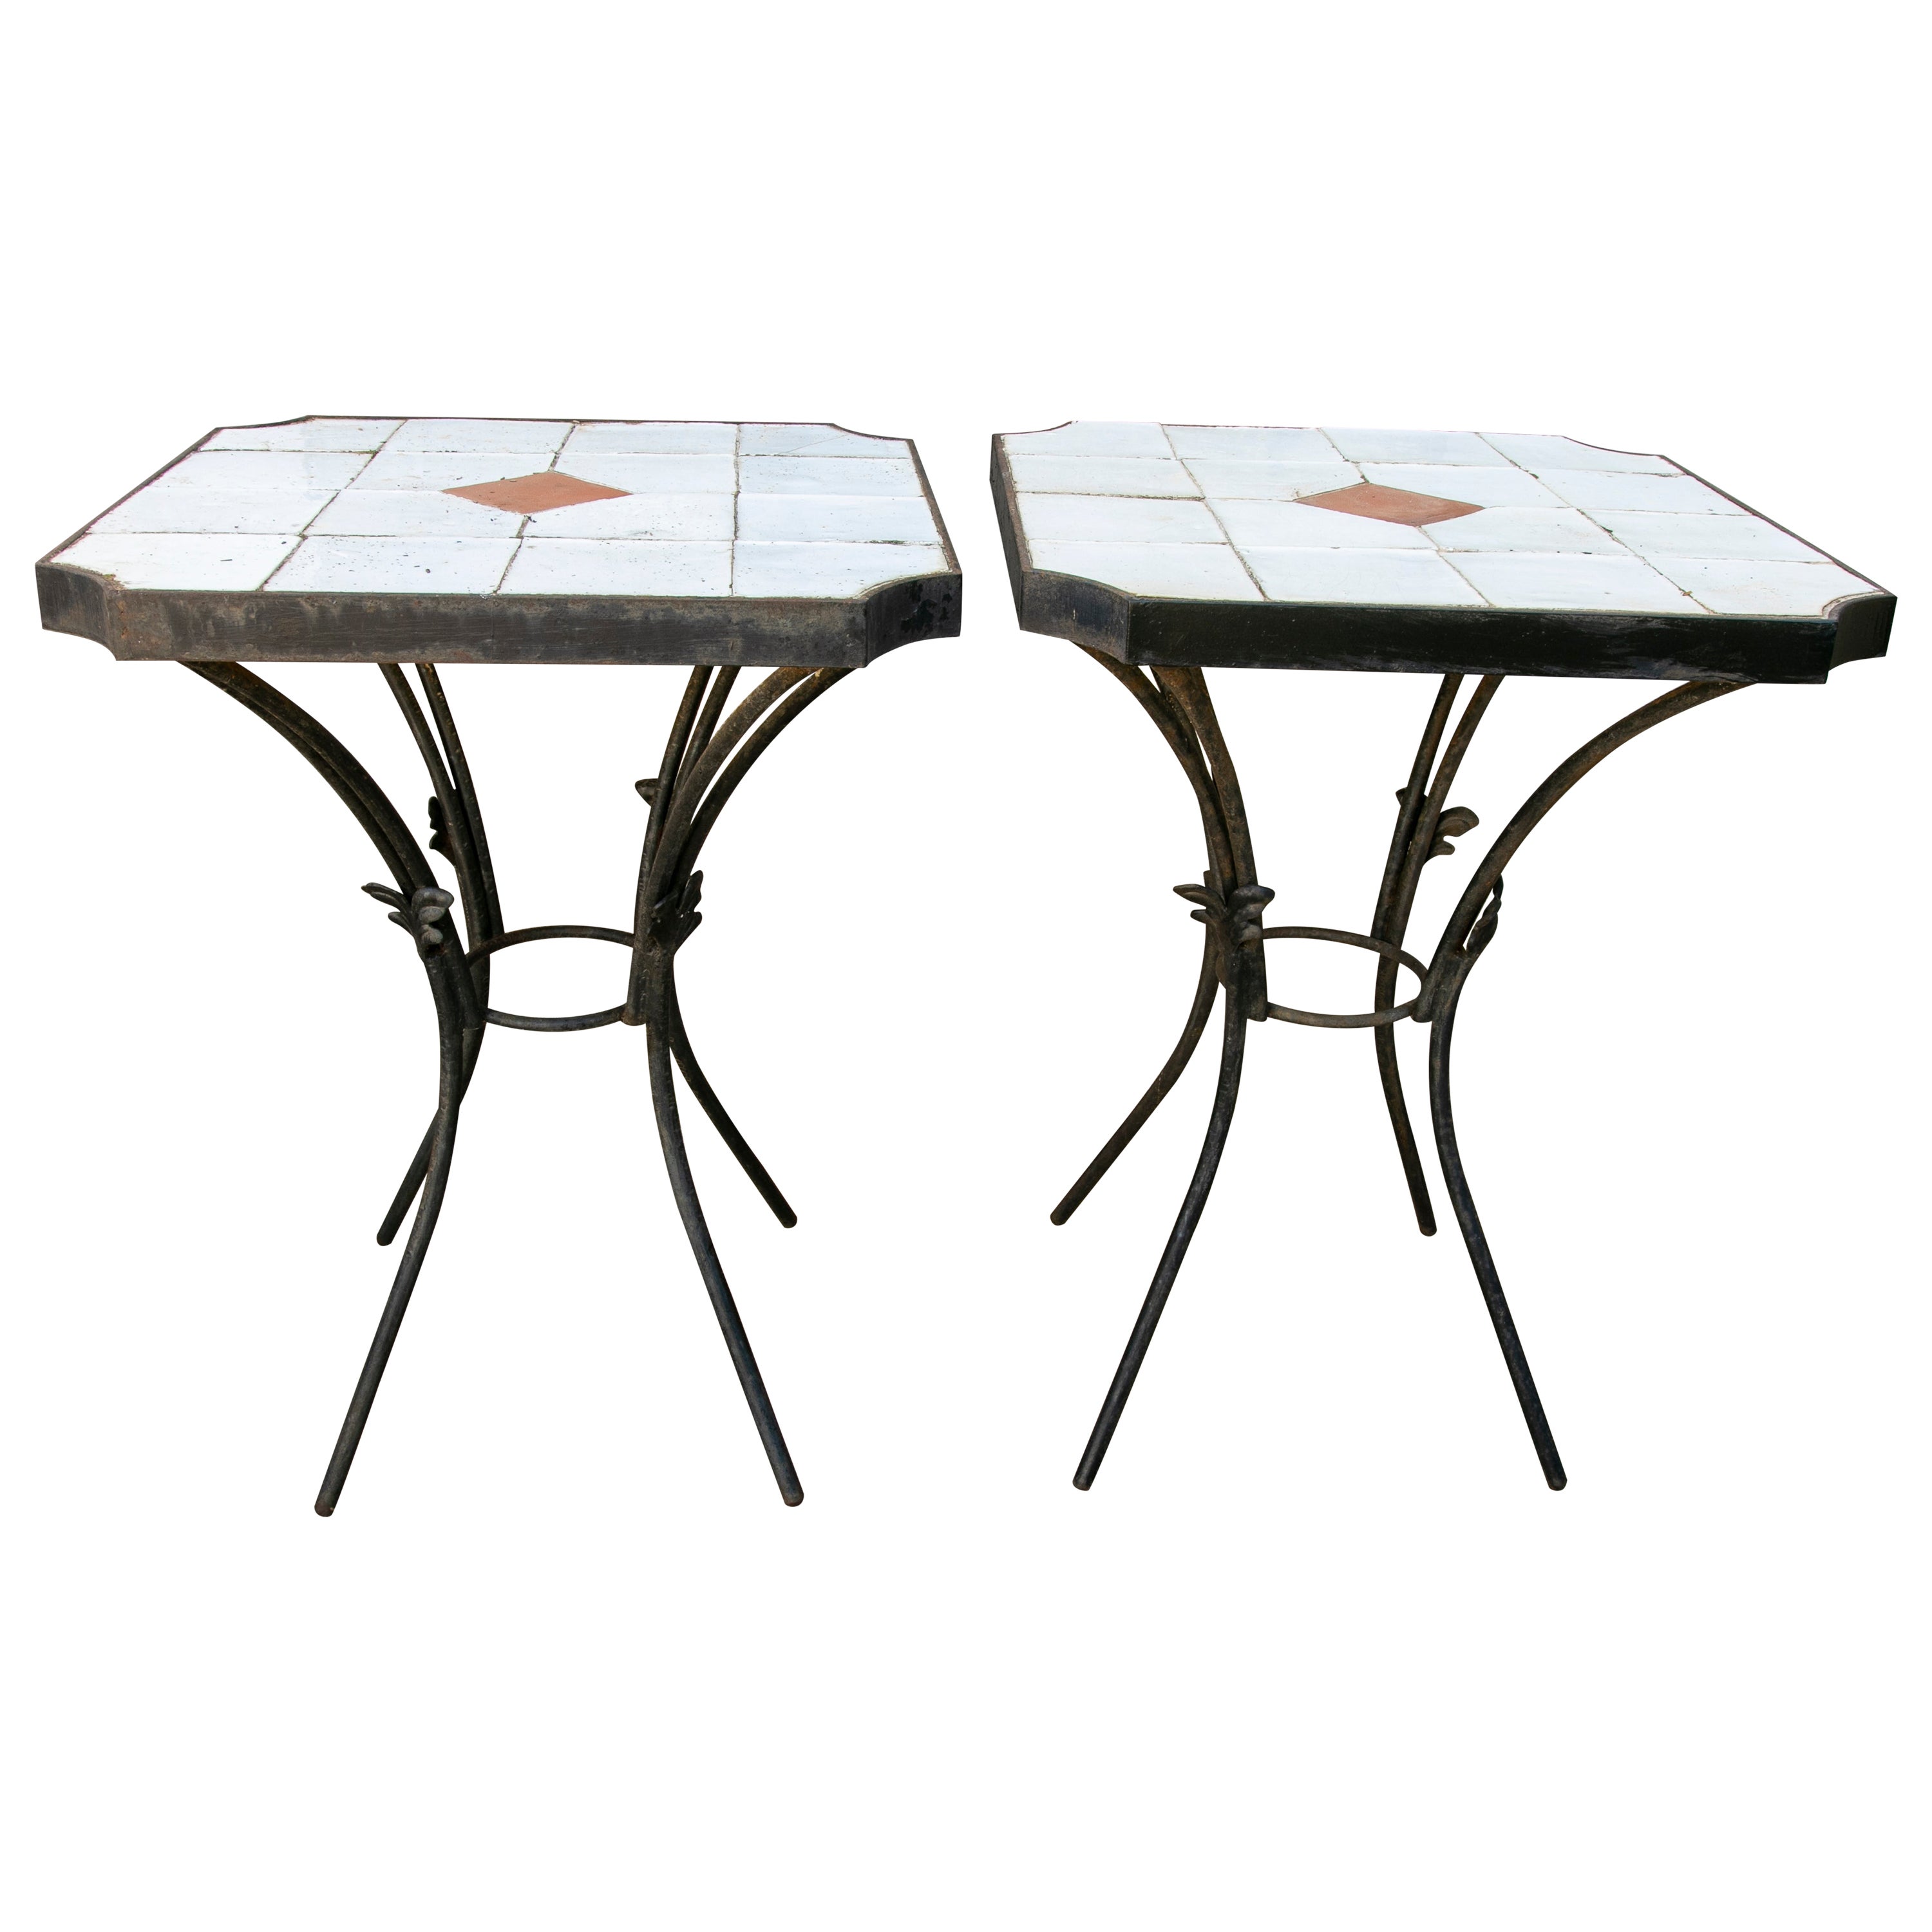 1980s Pair of Tables with Iron Base and Geometrical Tiles on Top